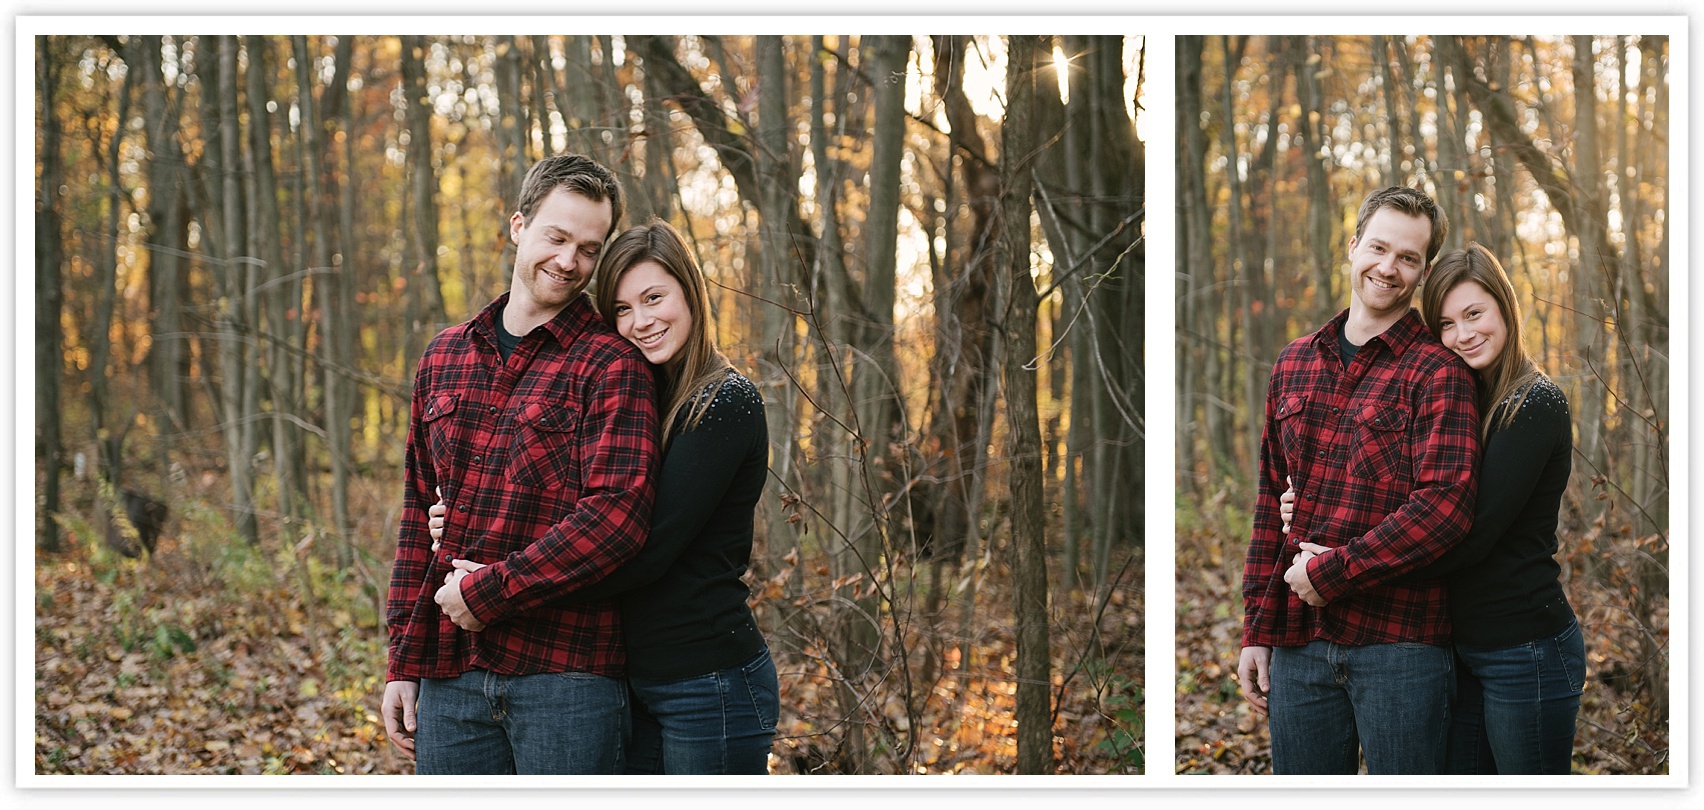 Lincoln Brick Park engagement photos from Allie & Co., Michigan wedding photographers